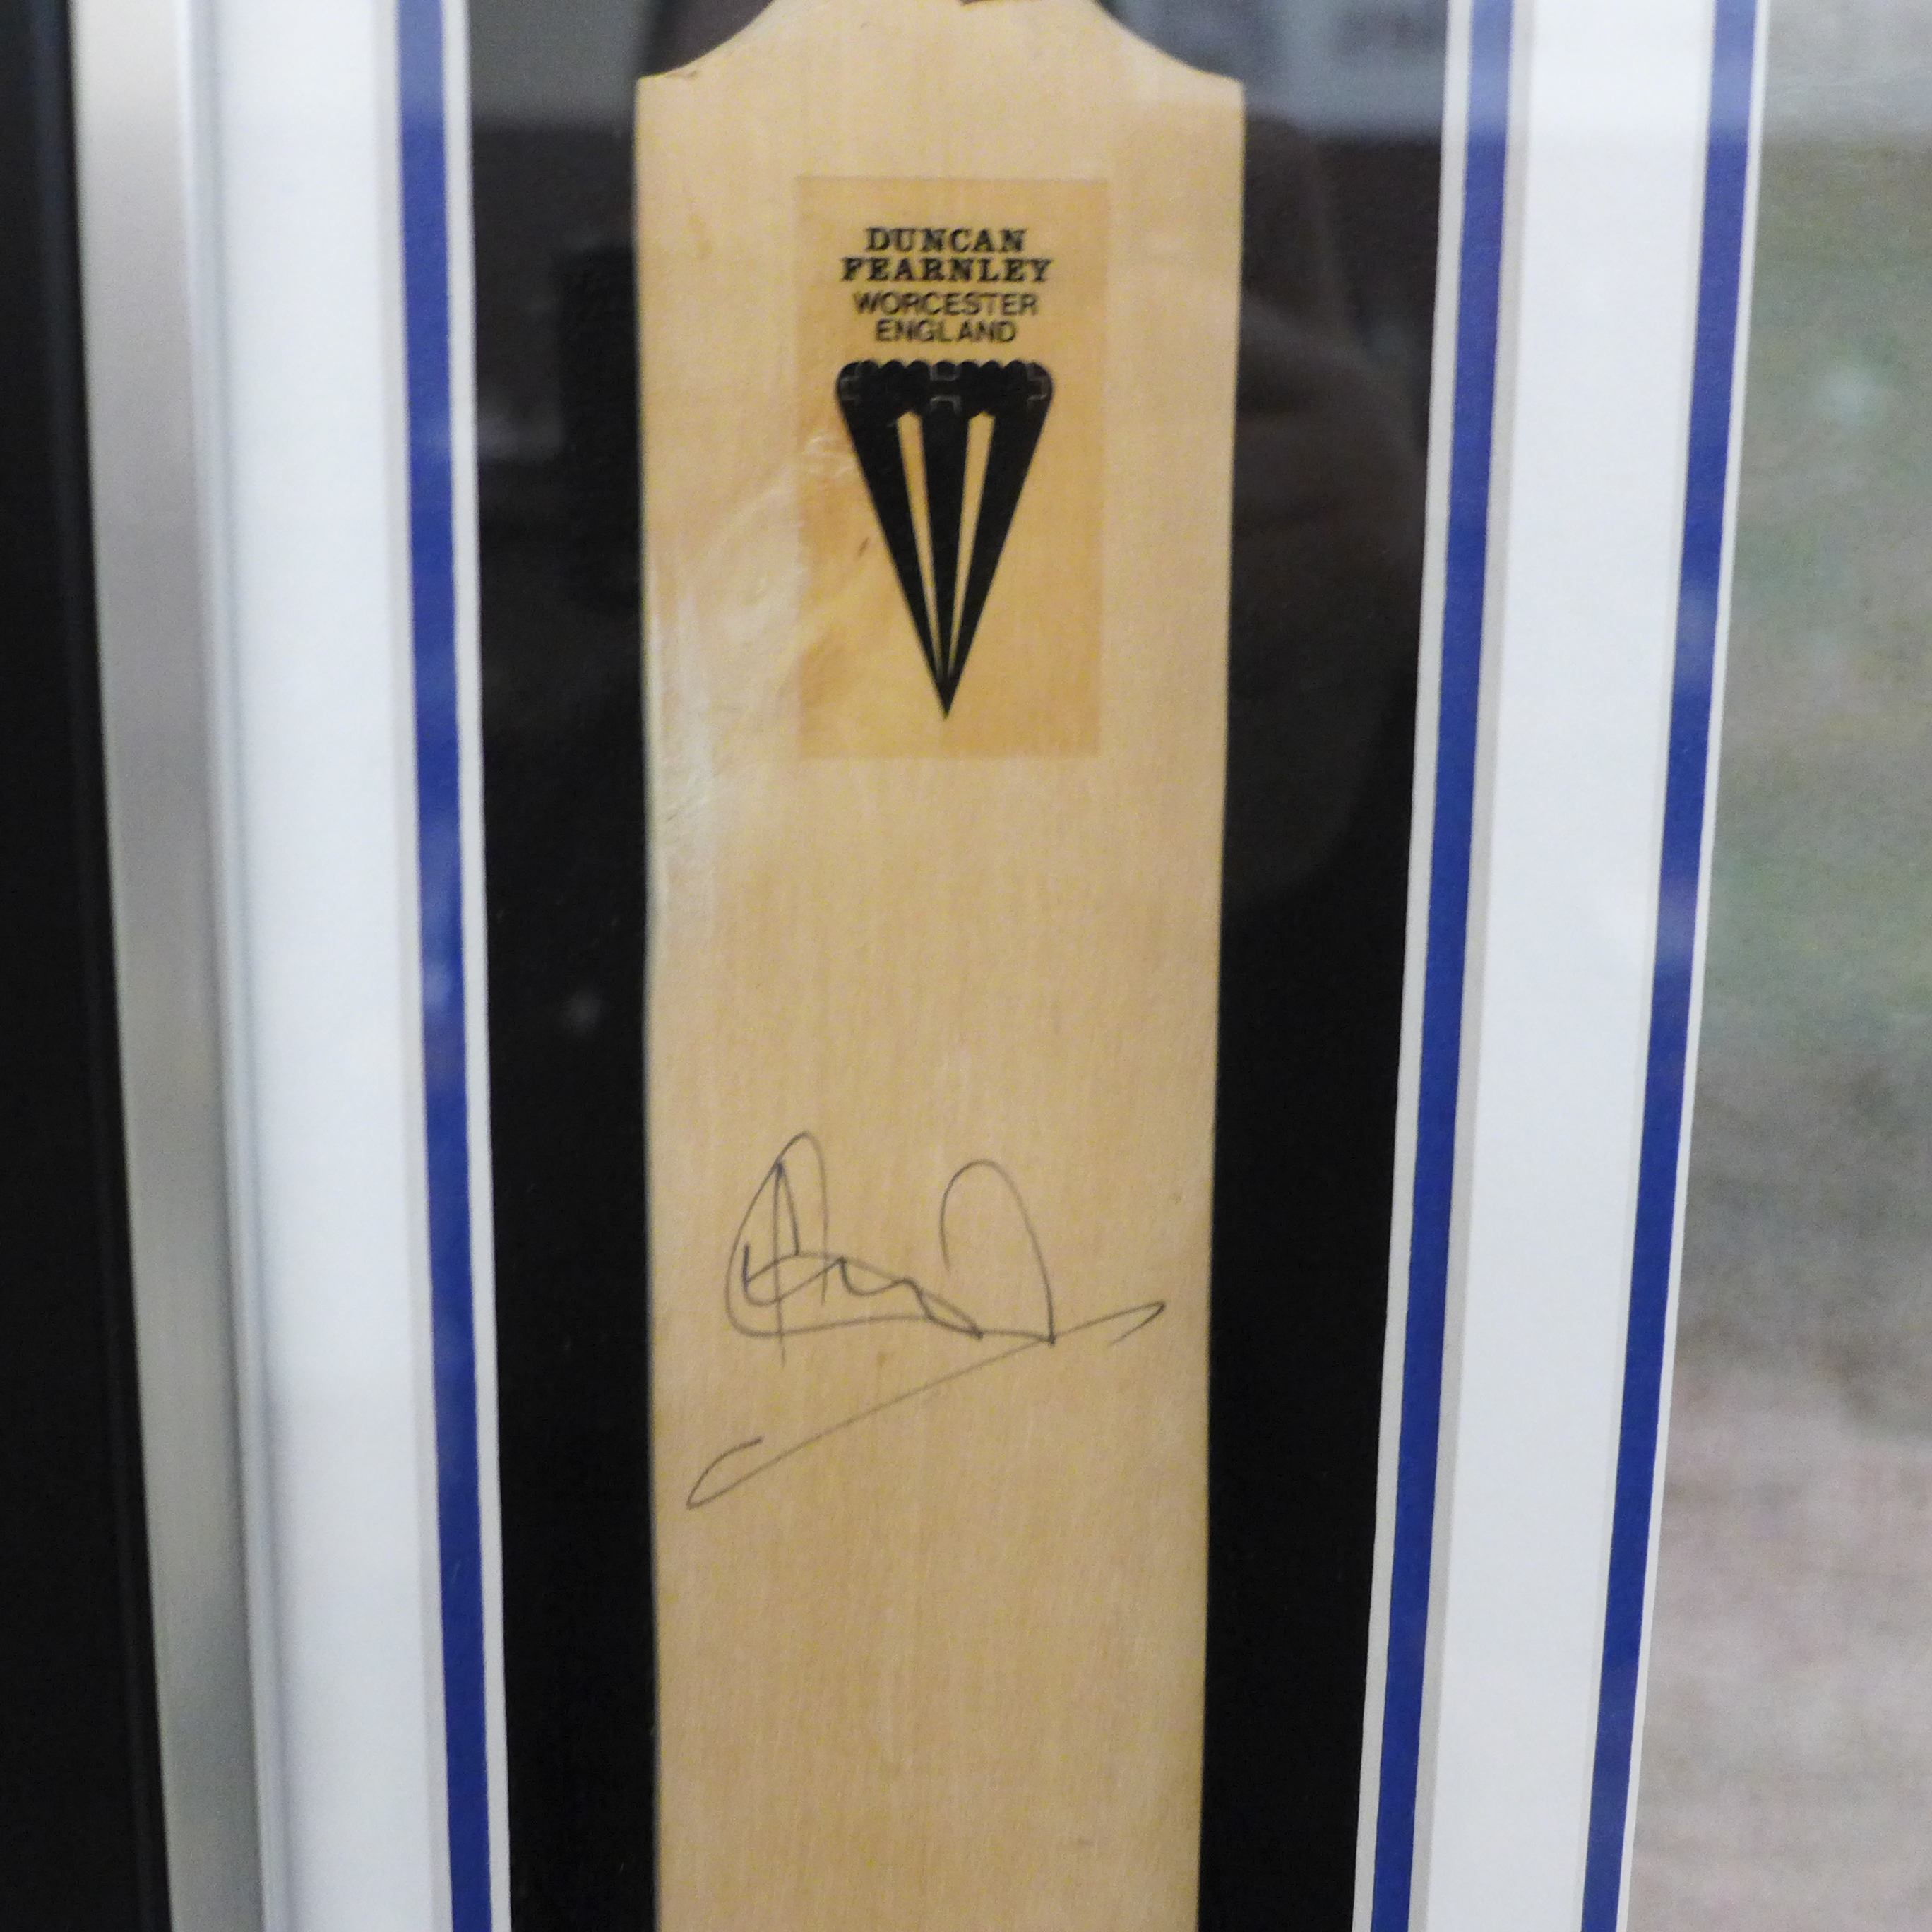 An Ian Botham signed display with miniature cricket bat, framed - Image 2 of 3